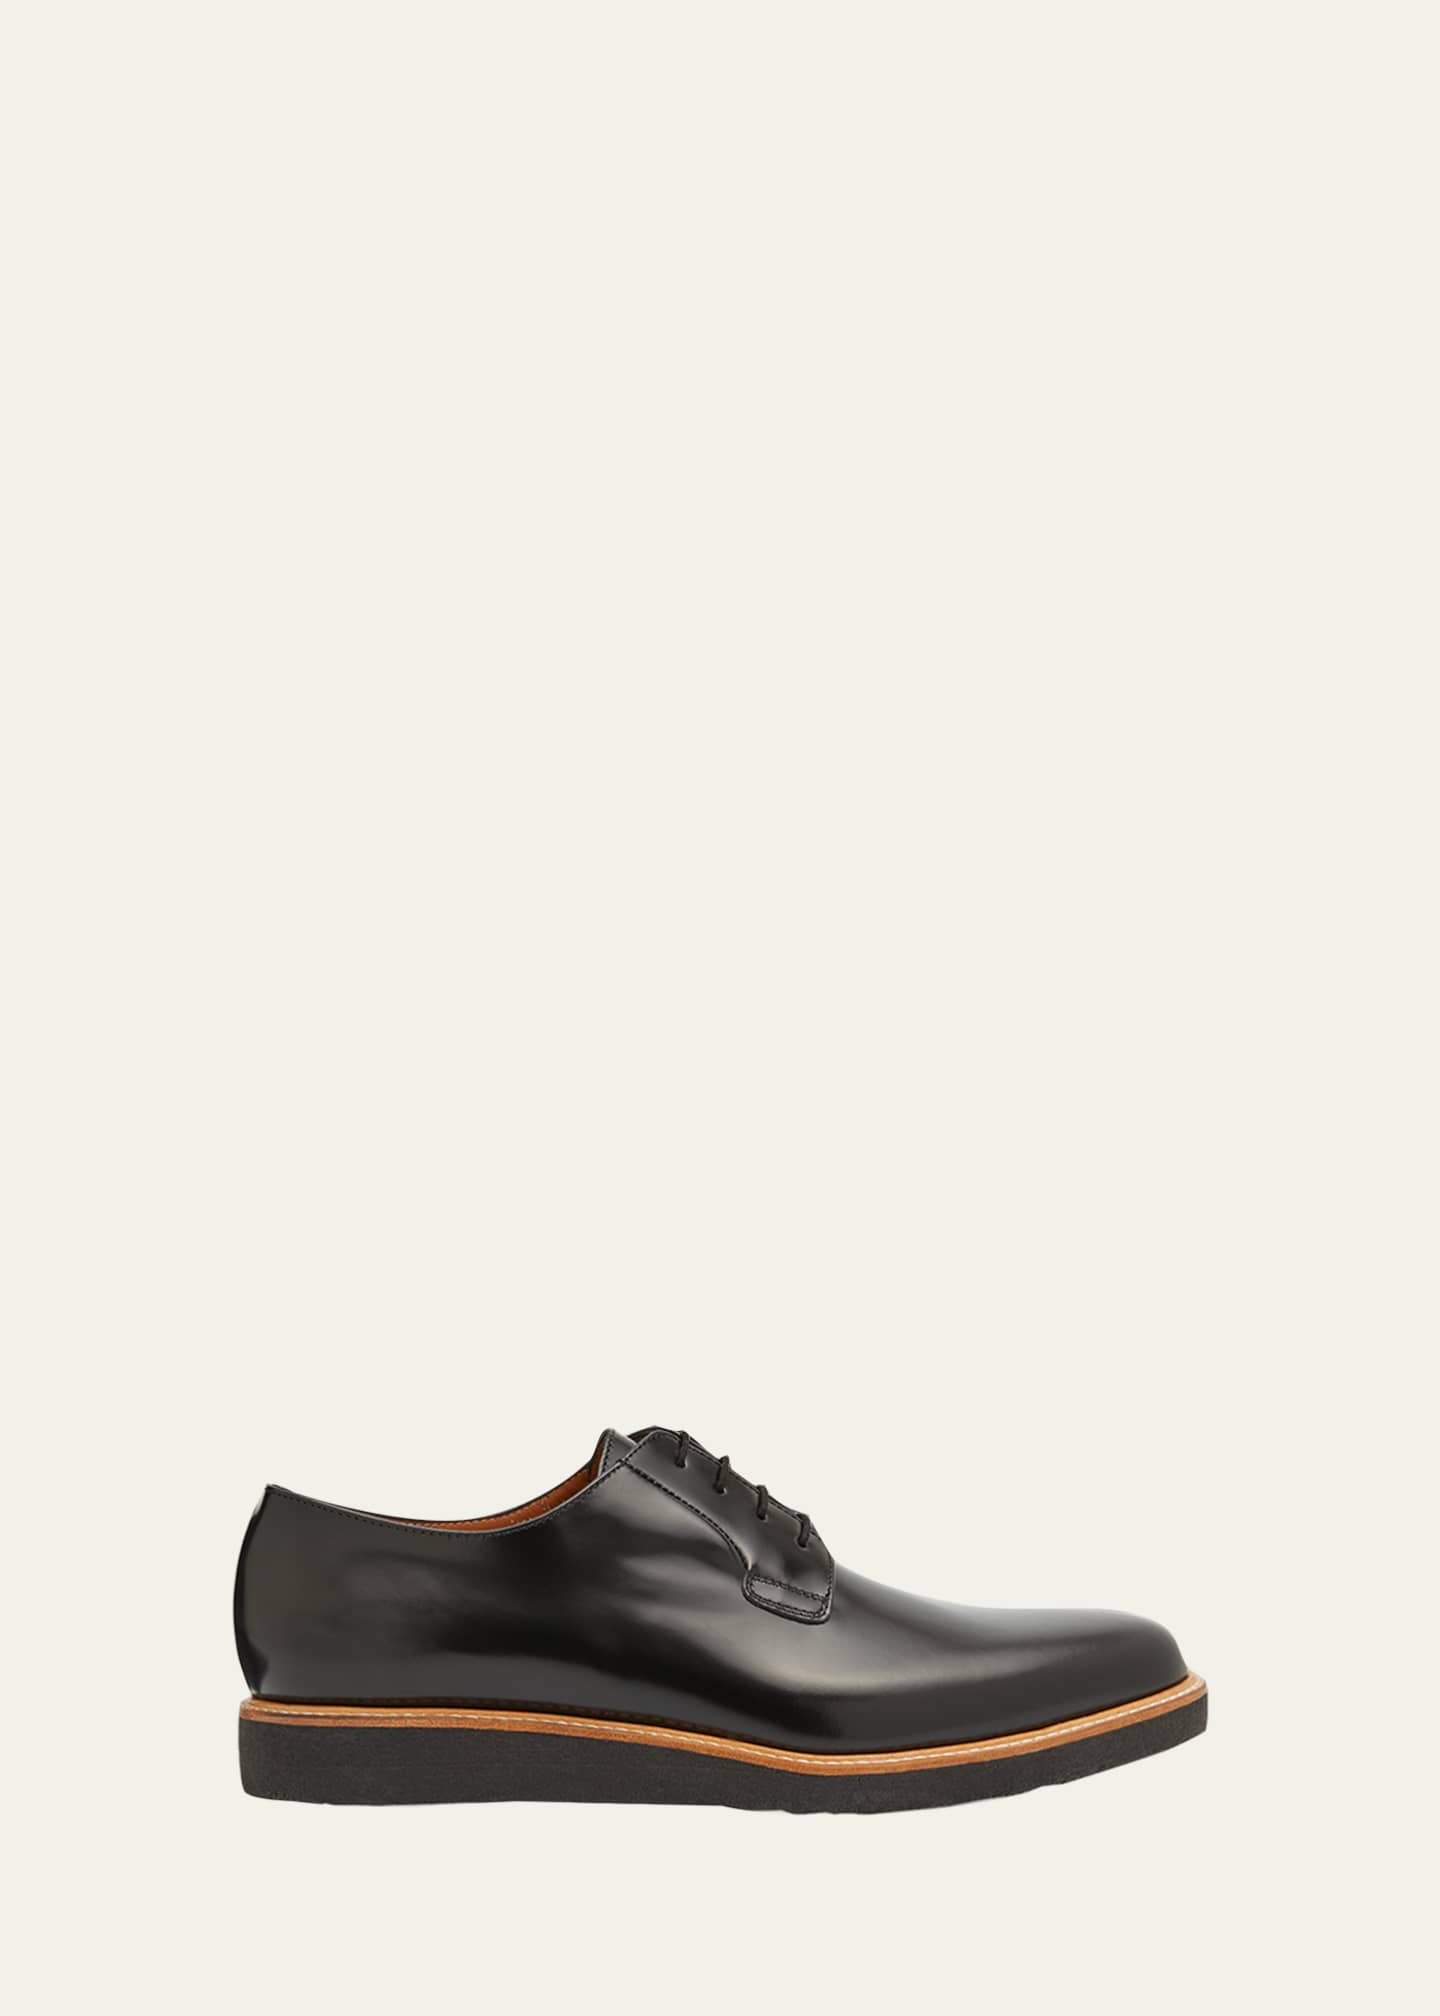 Common Projects Men's Shiny Crepe Derby Shoes - Bergdorf Goodman